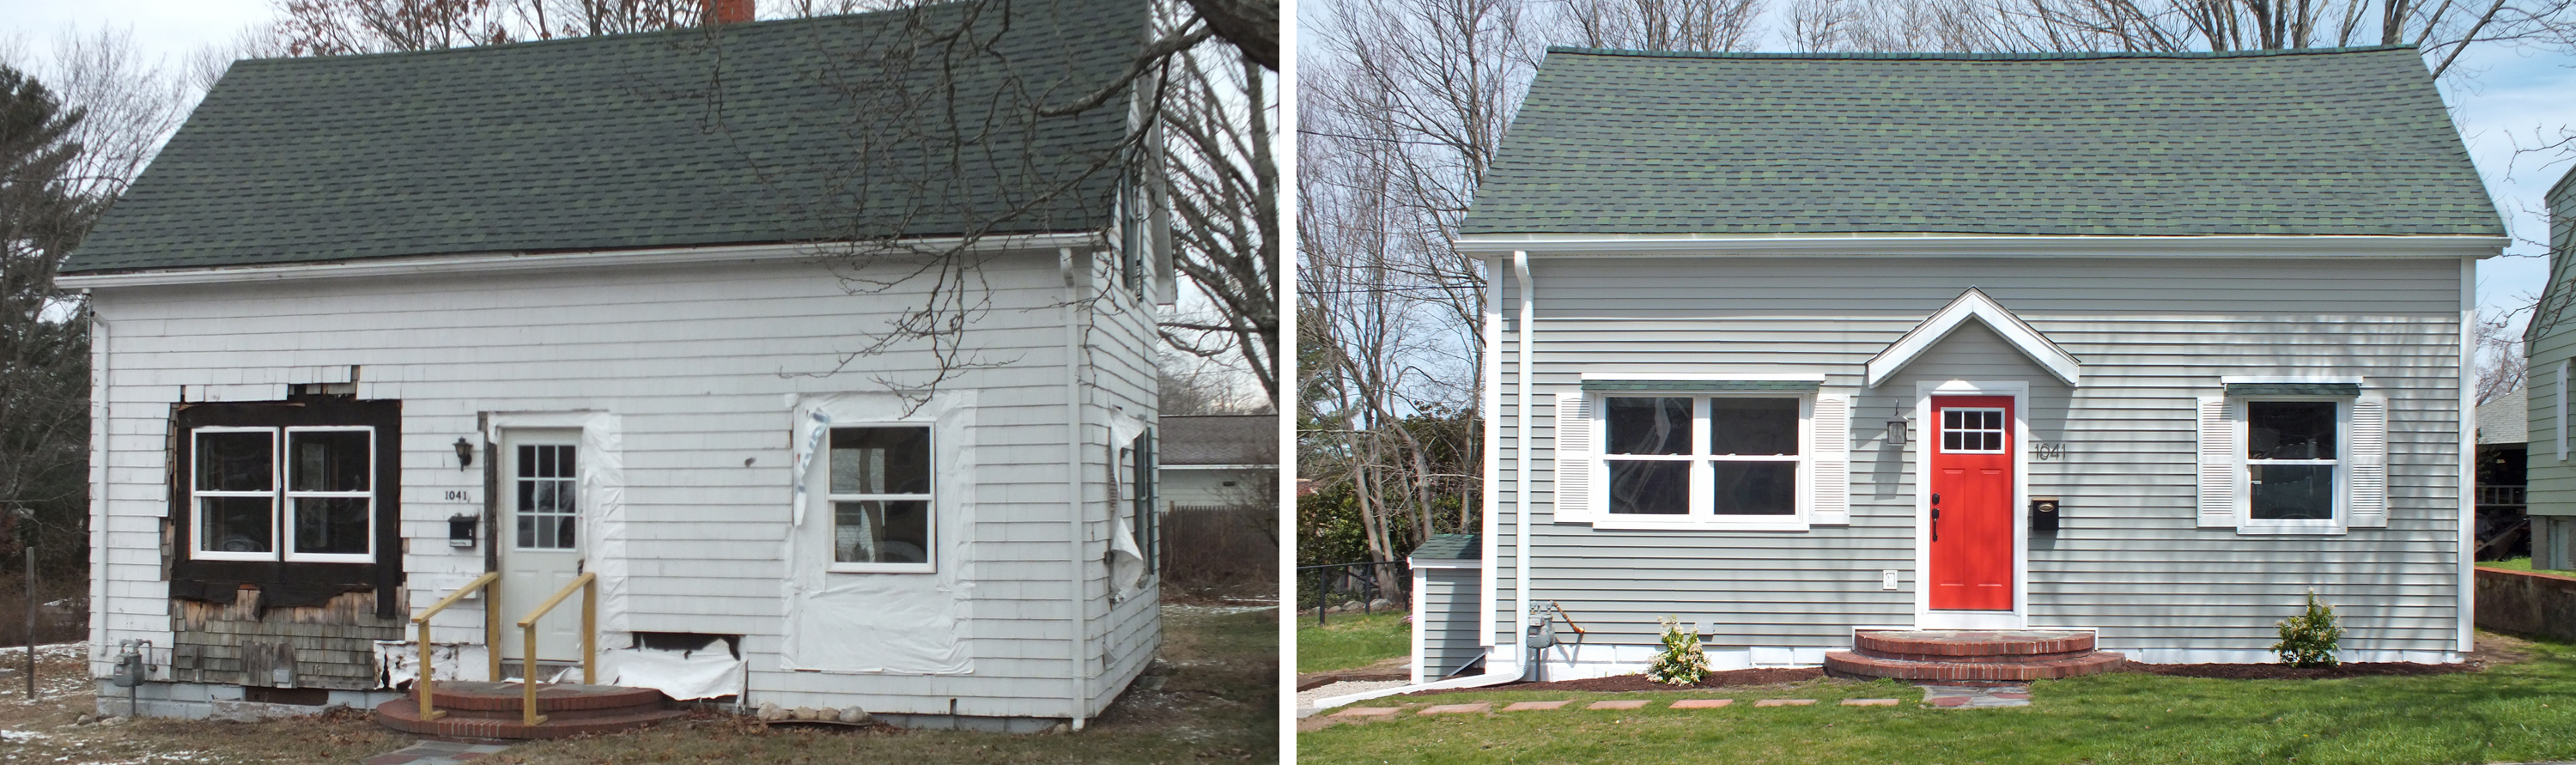 Cottage Renovation Before and After